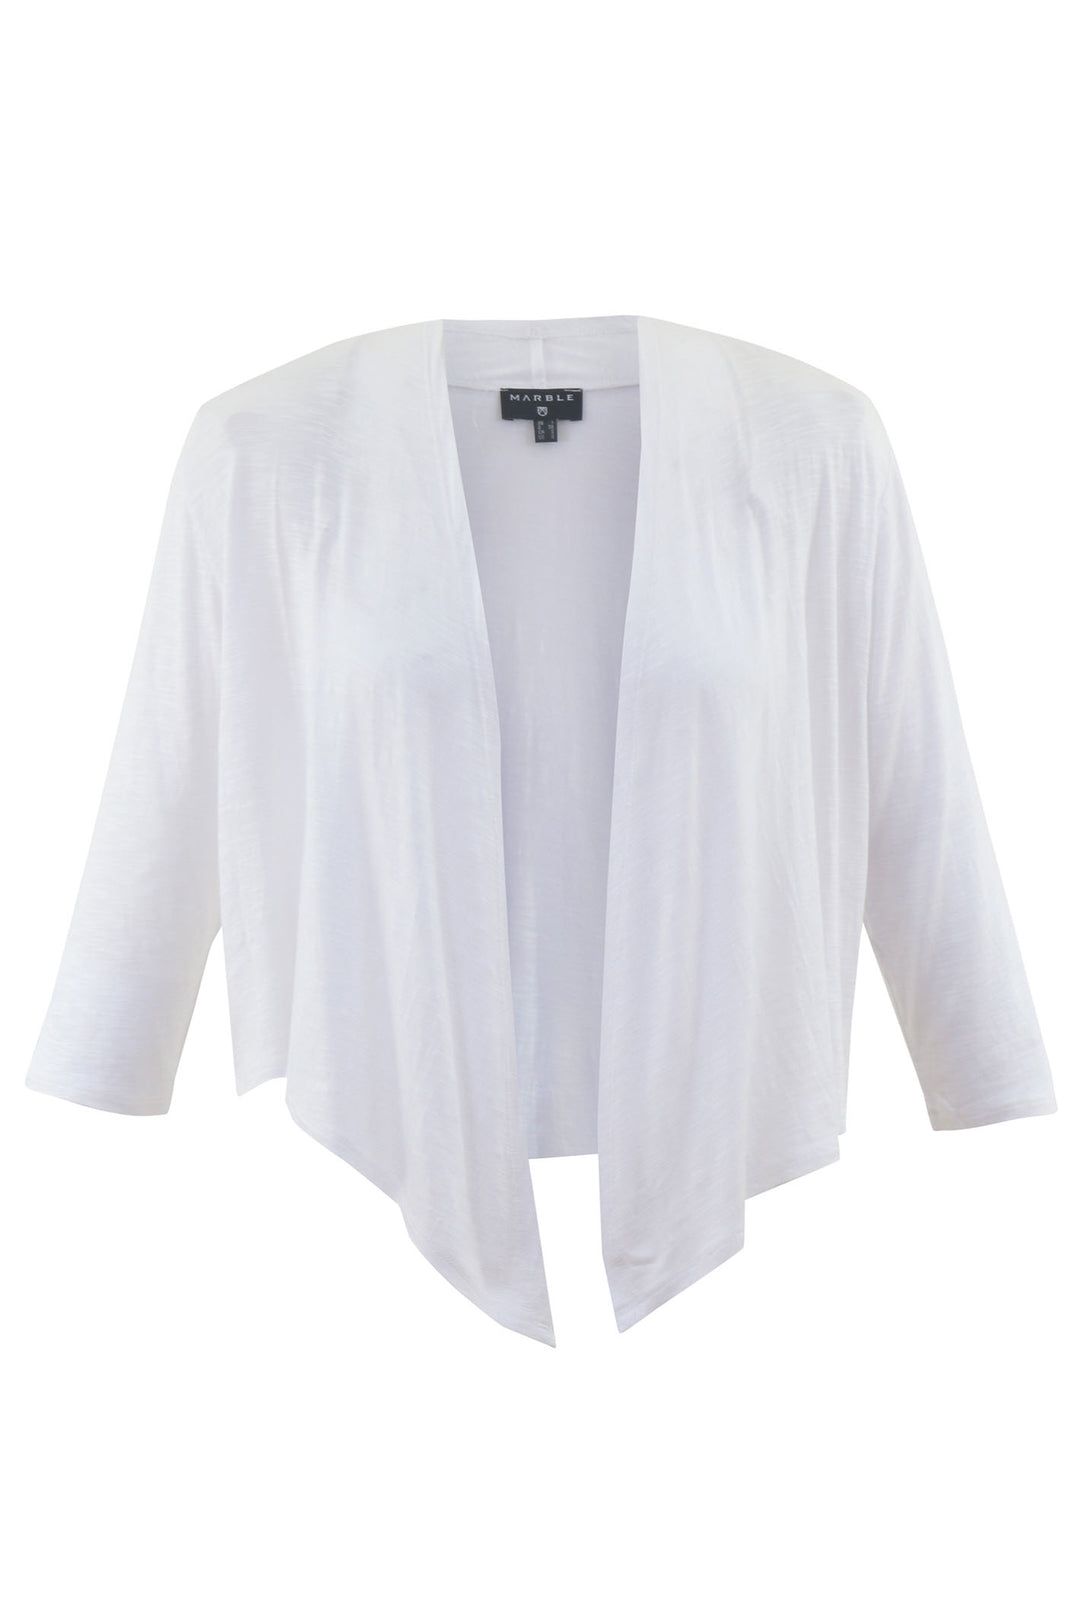 Marble Fashions 6541 102 White Waterfall Jersey Cardigan Shrug - Experience Boutique